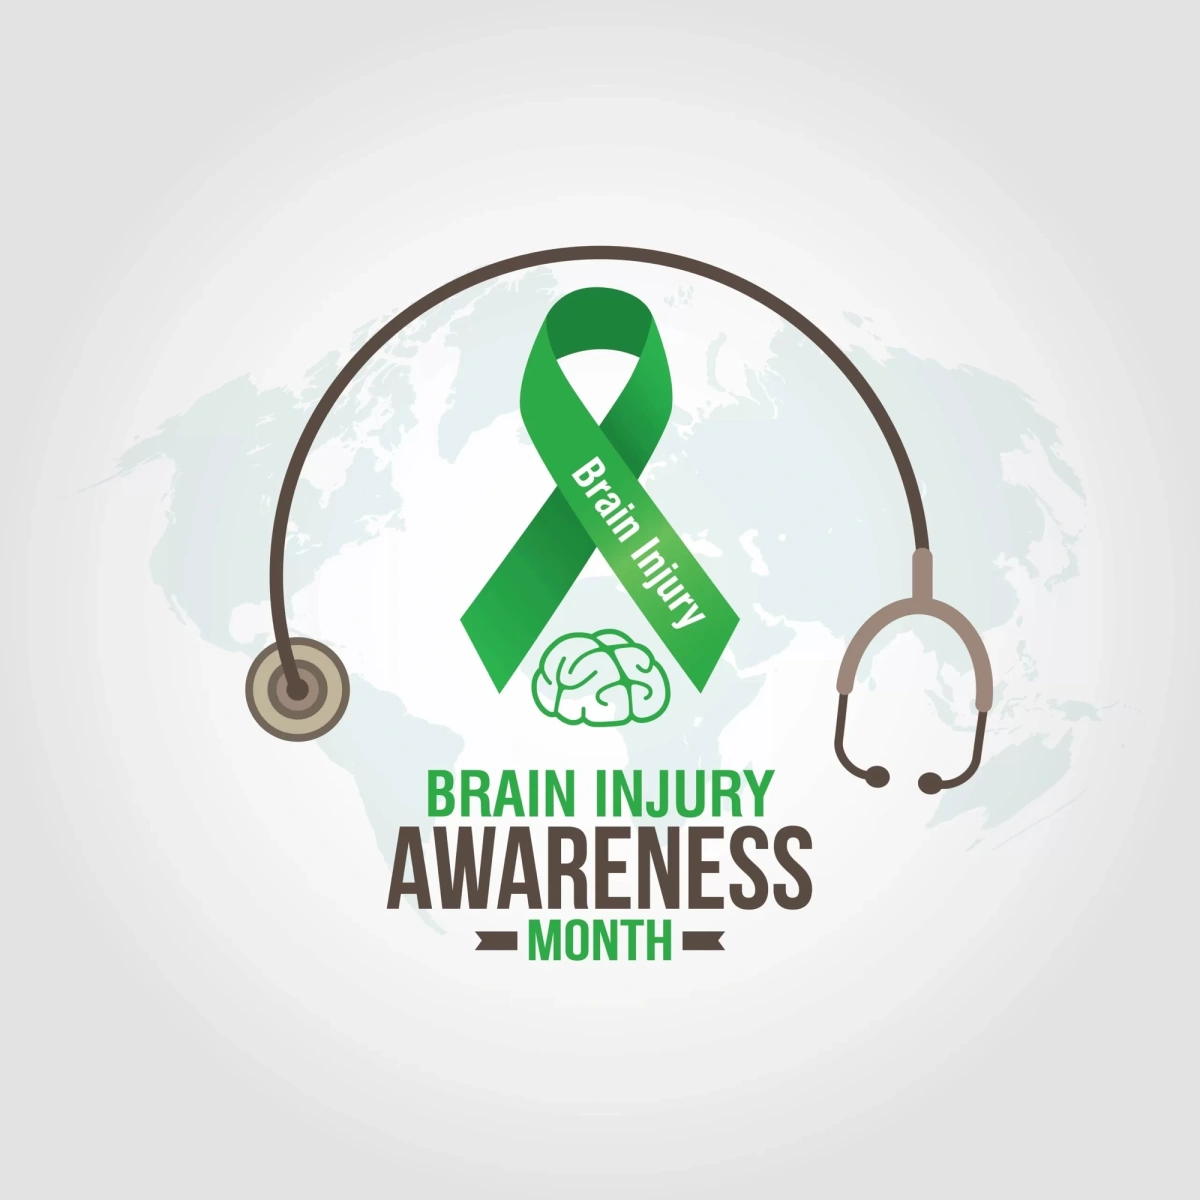 March is Brain Injury Awareness Month